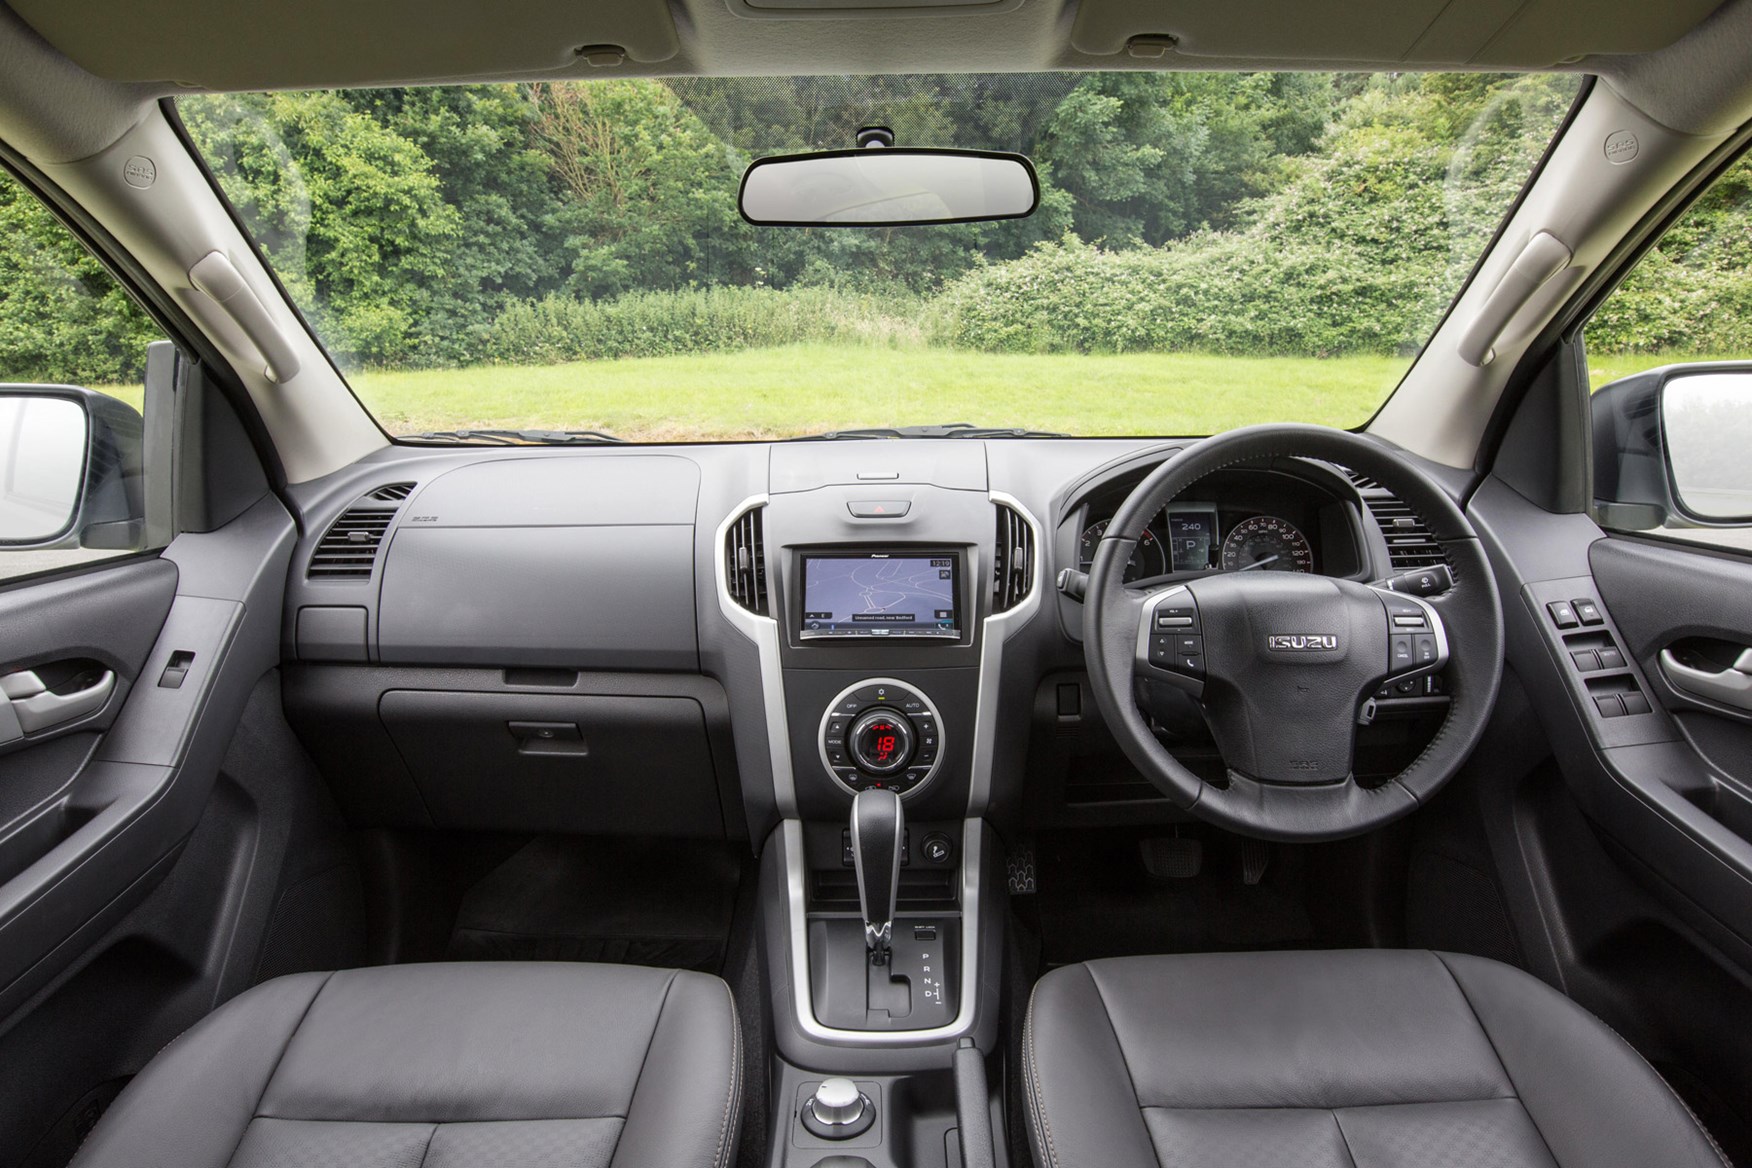 Isuzu D-Max full review on Parkers Vans - cabin interior